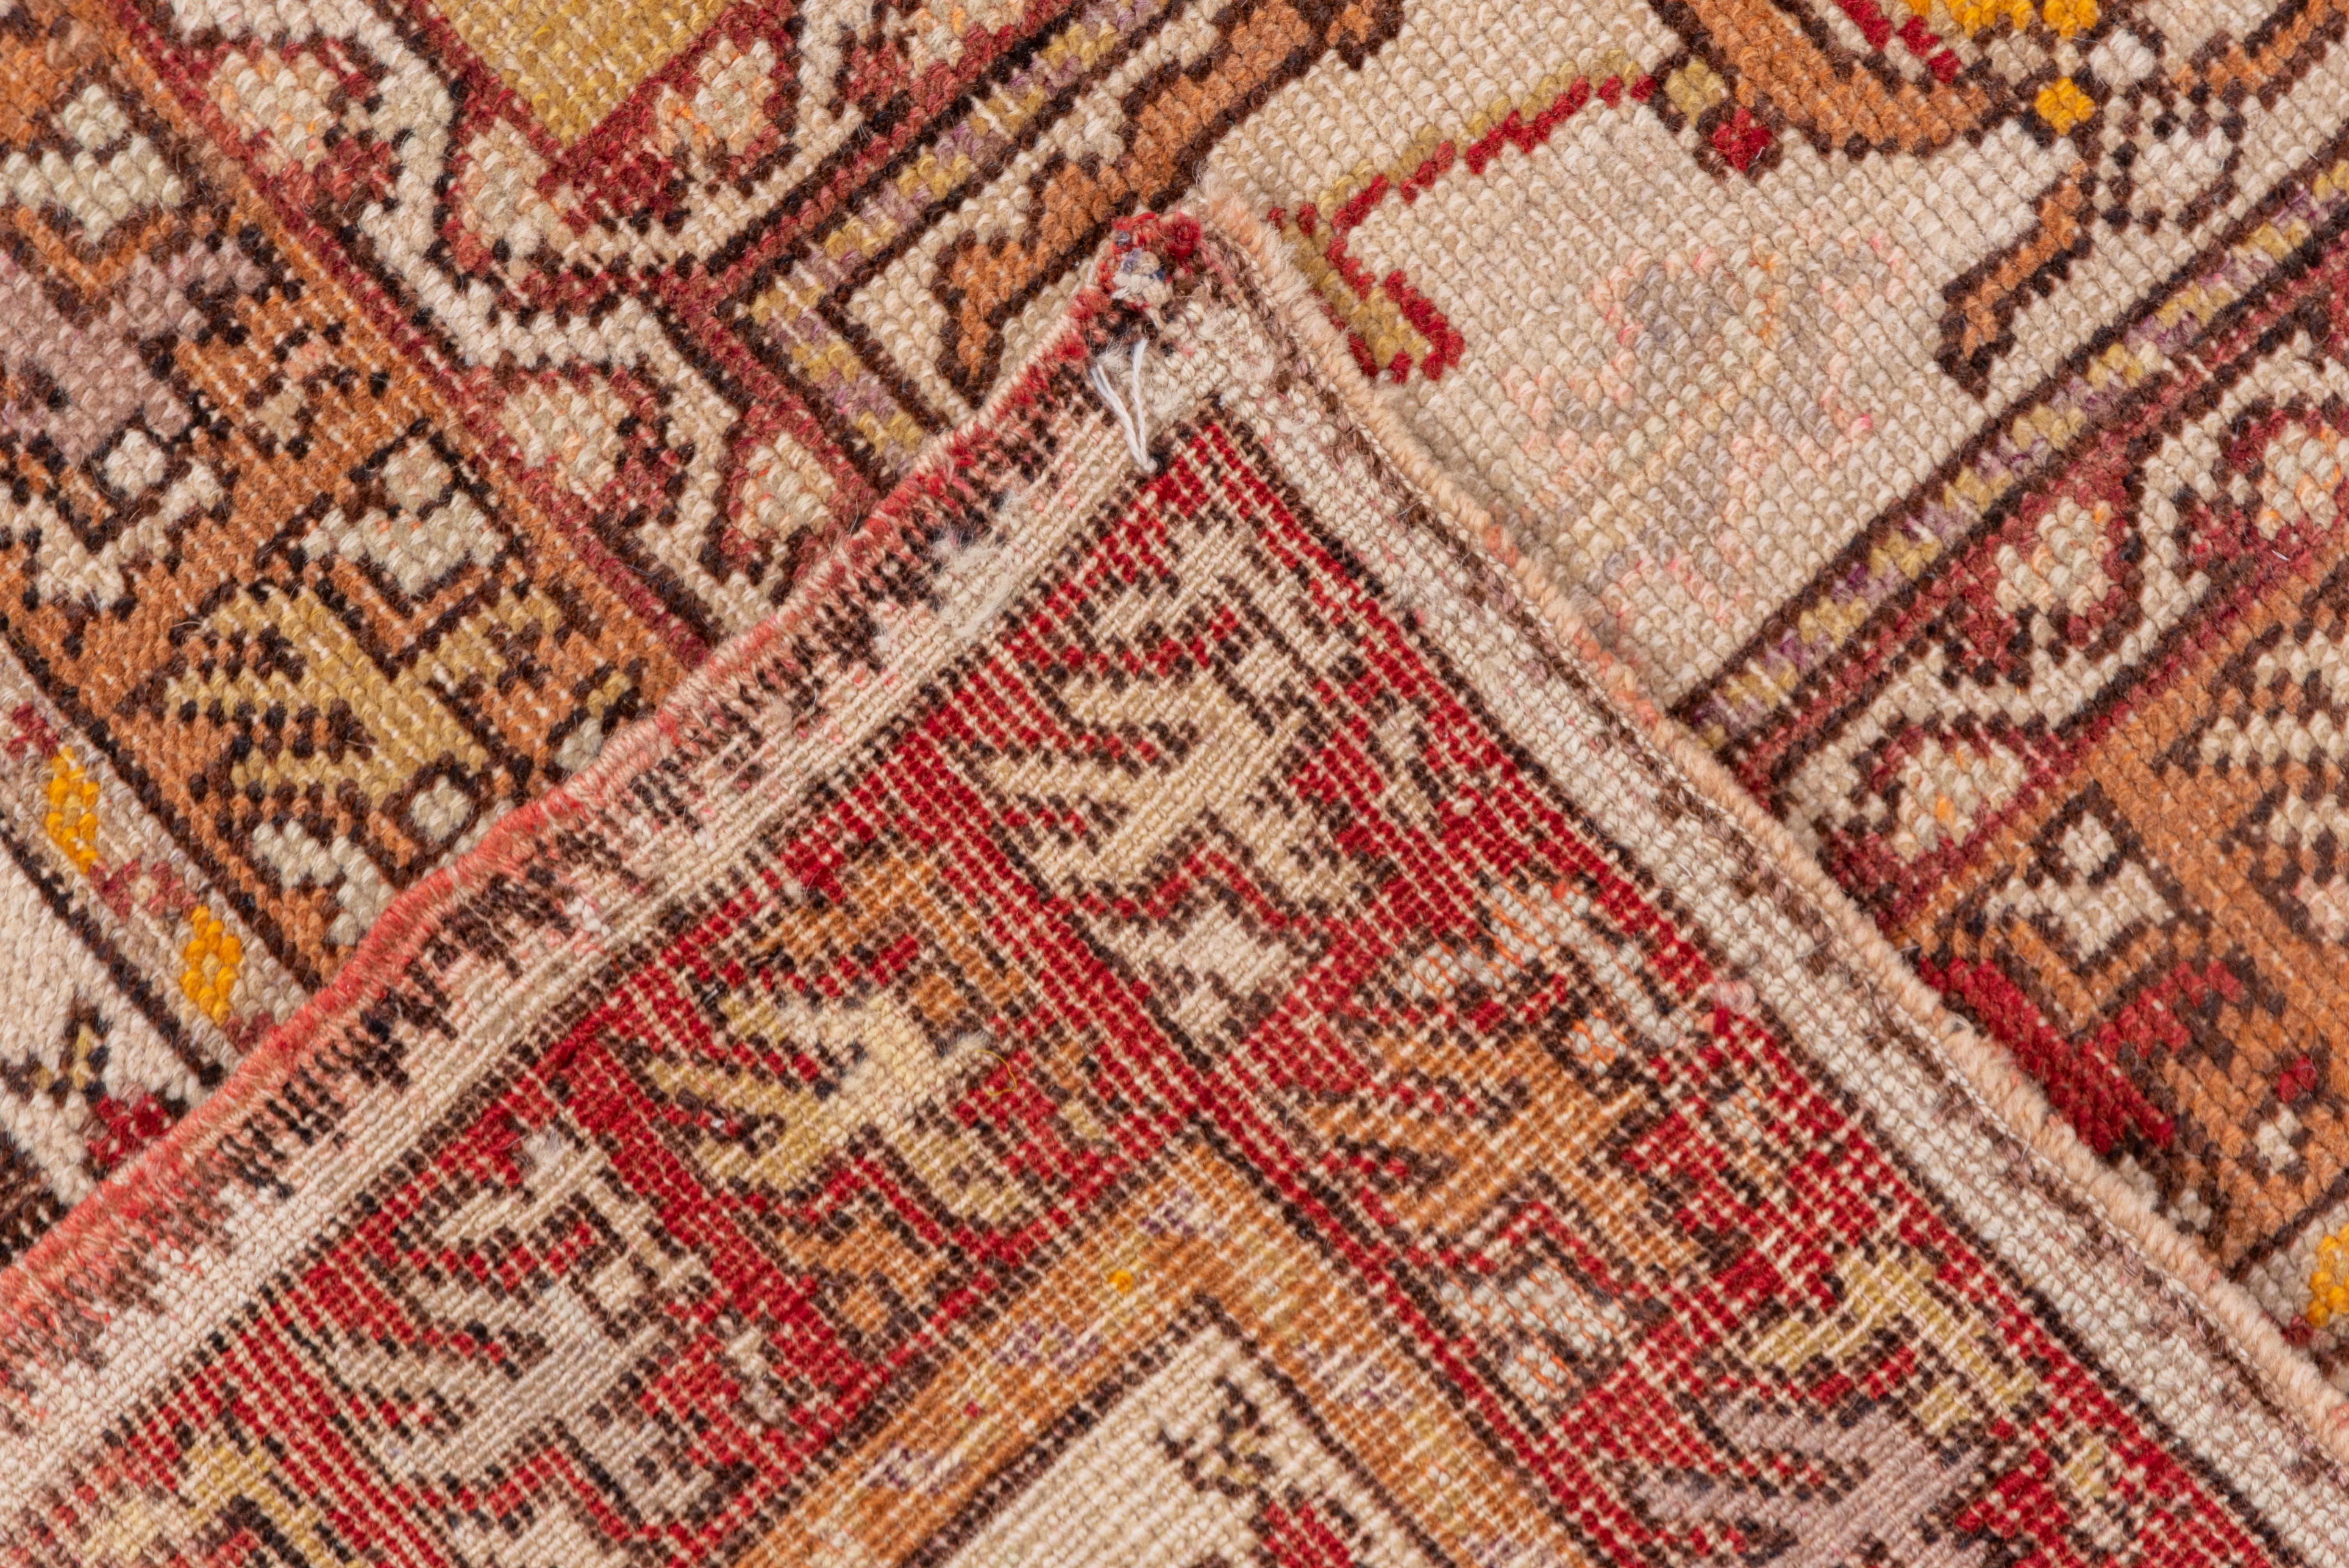 This Anatolian rustic scatter borrows from the Classic Anatolian design vocabulary: striped border, panels at the pale straw field ends. A Bergama-style flower outer border. Botehs on vines flow around the multiply stepped red medallion with a